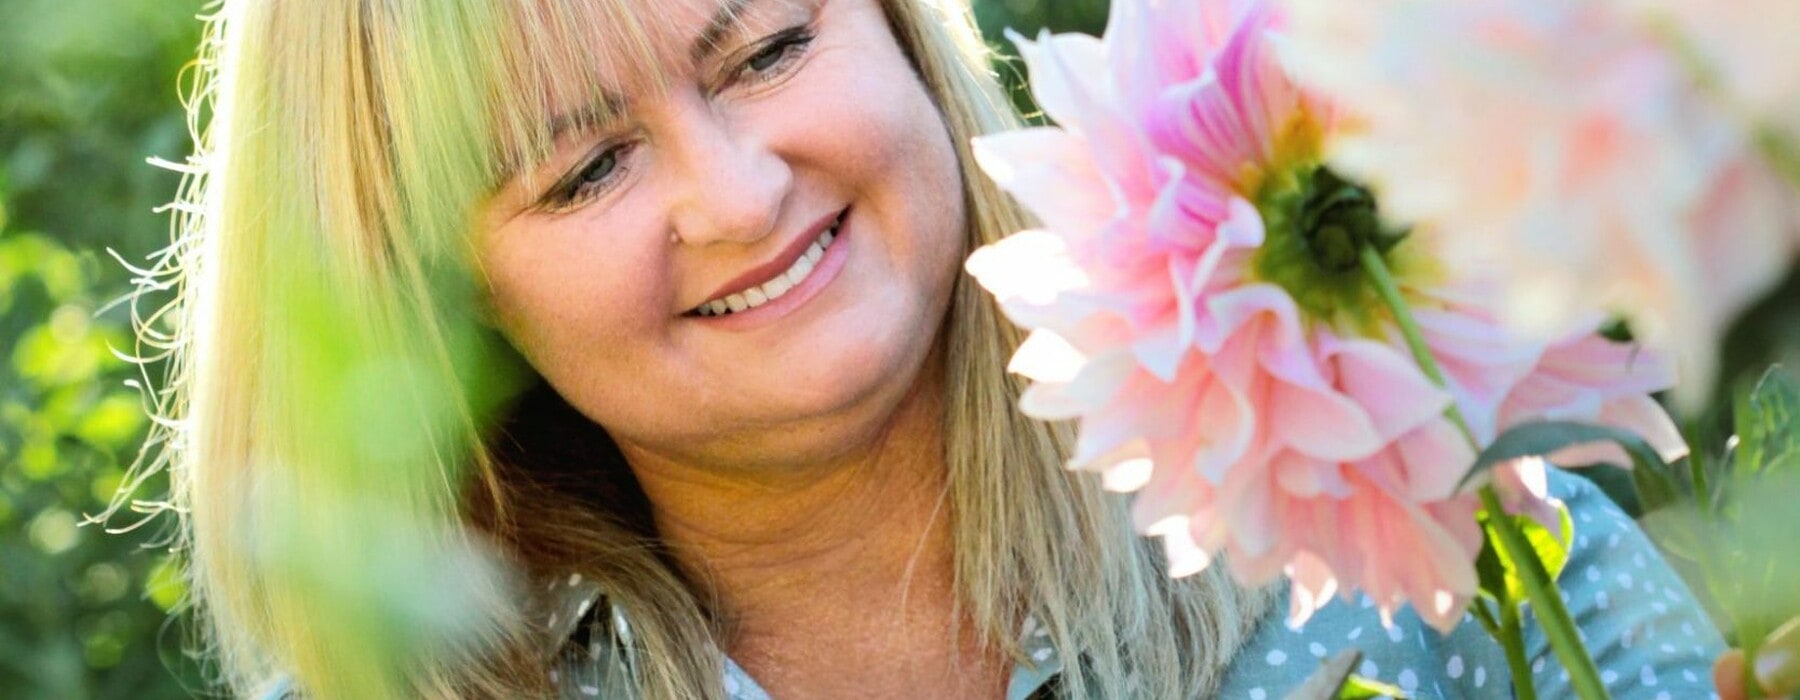 Lynda Hallinan smiling while holding cutting shears in a field of dahlias